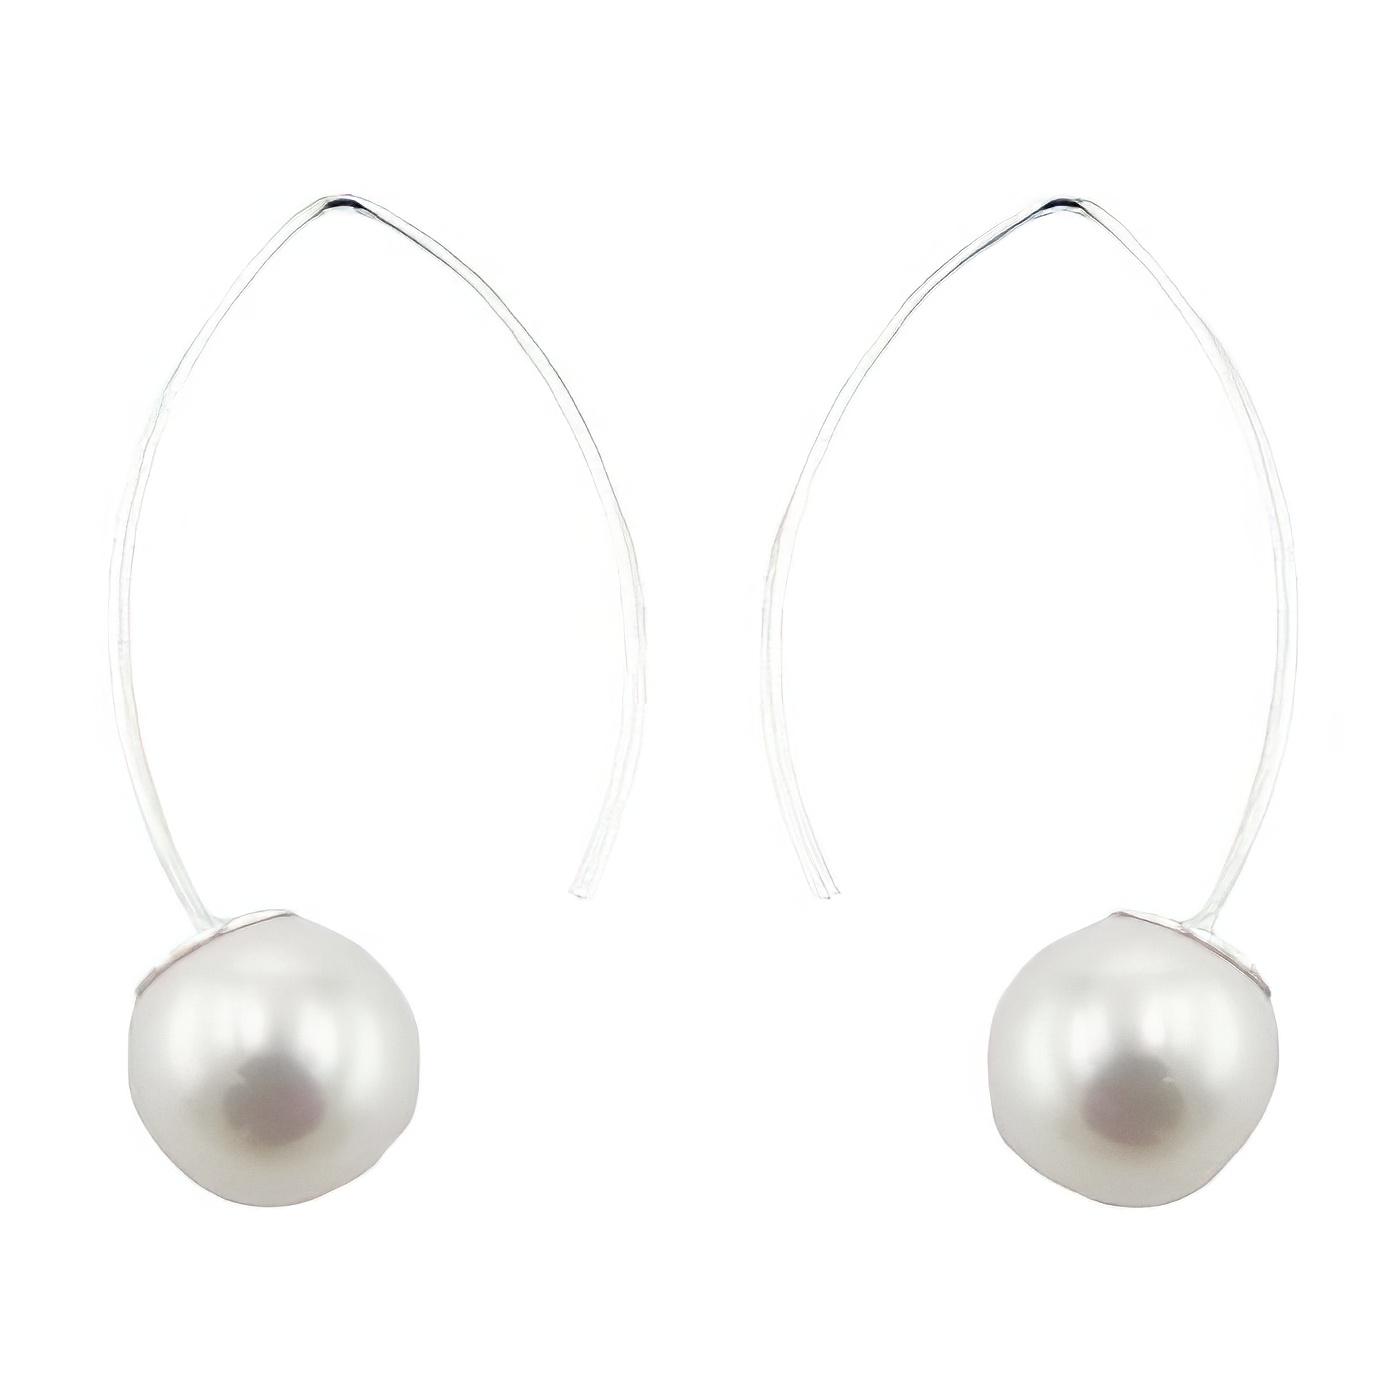 Imitation Pearls On Generously Curved Silver Stick Hangers by BeYindi 